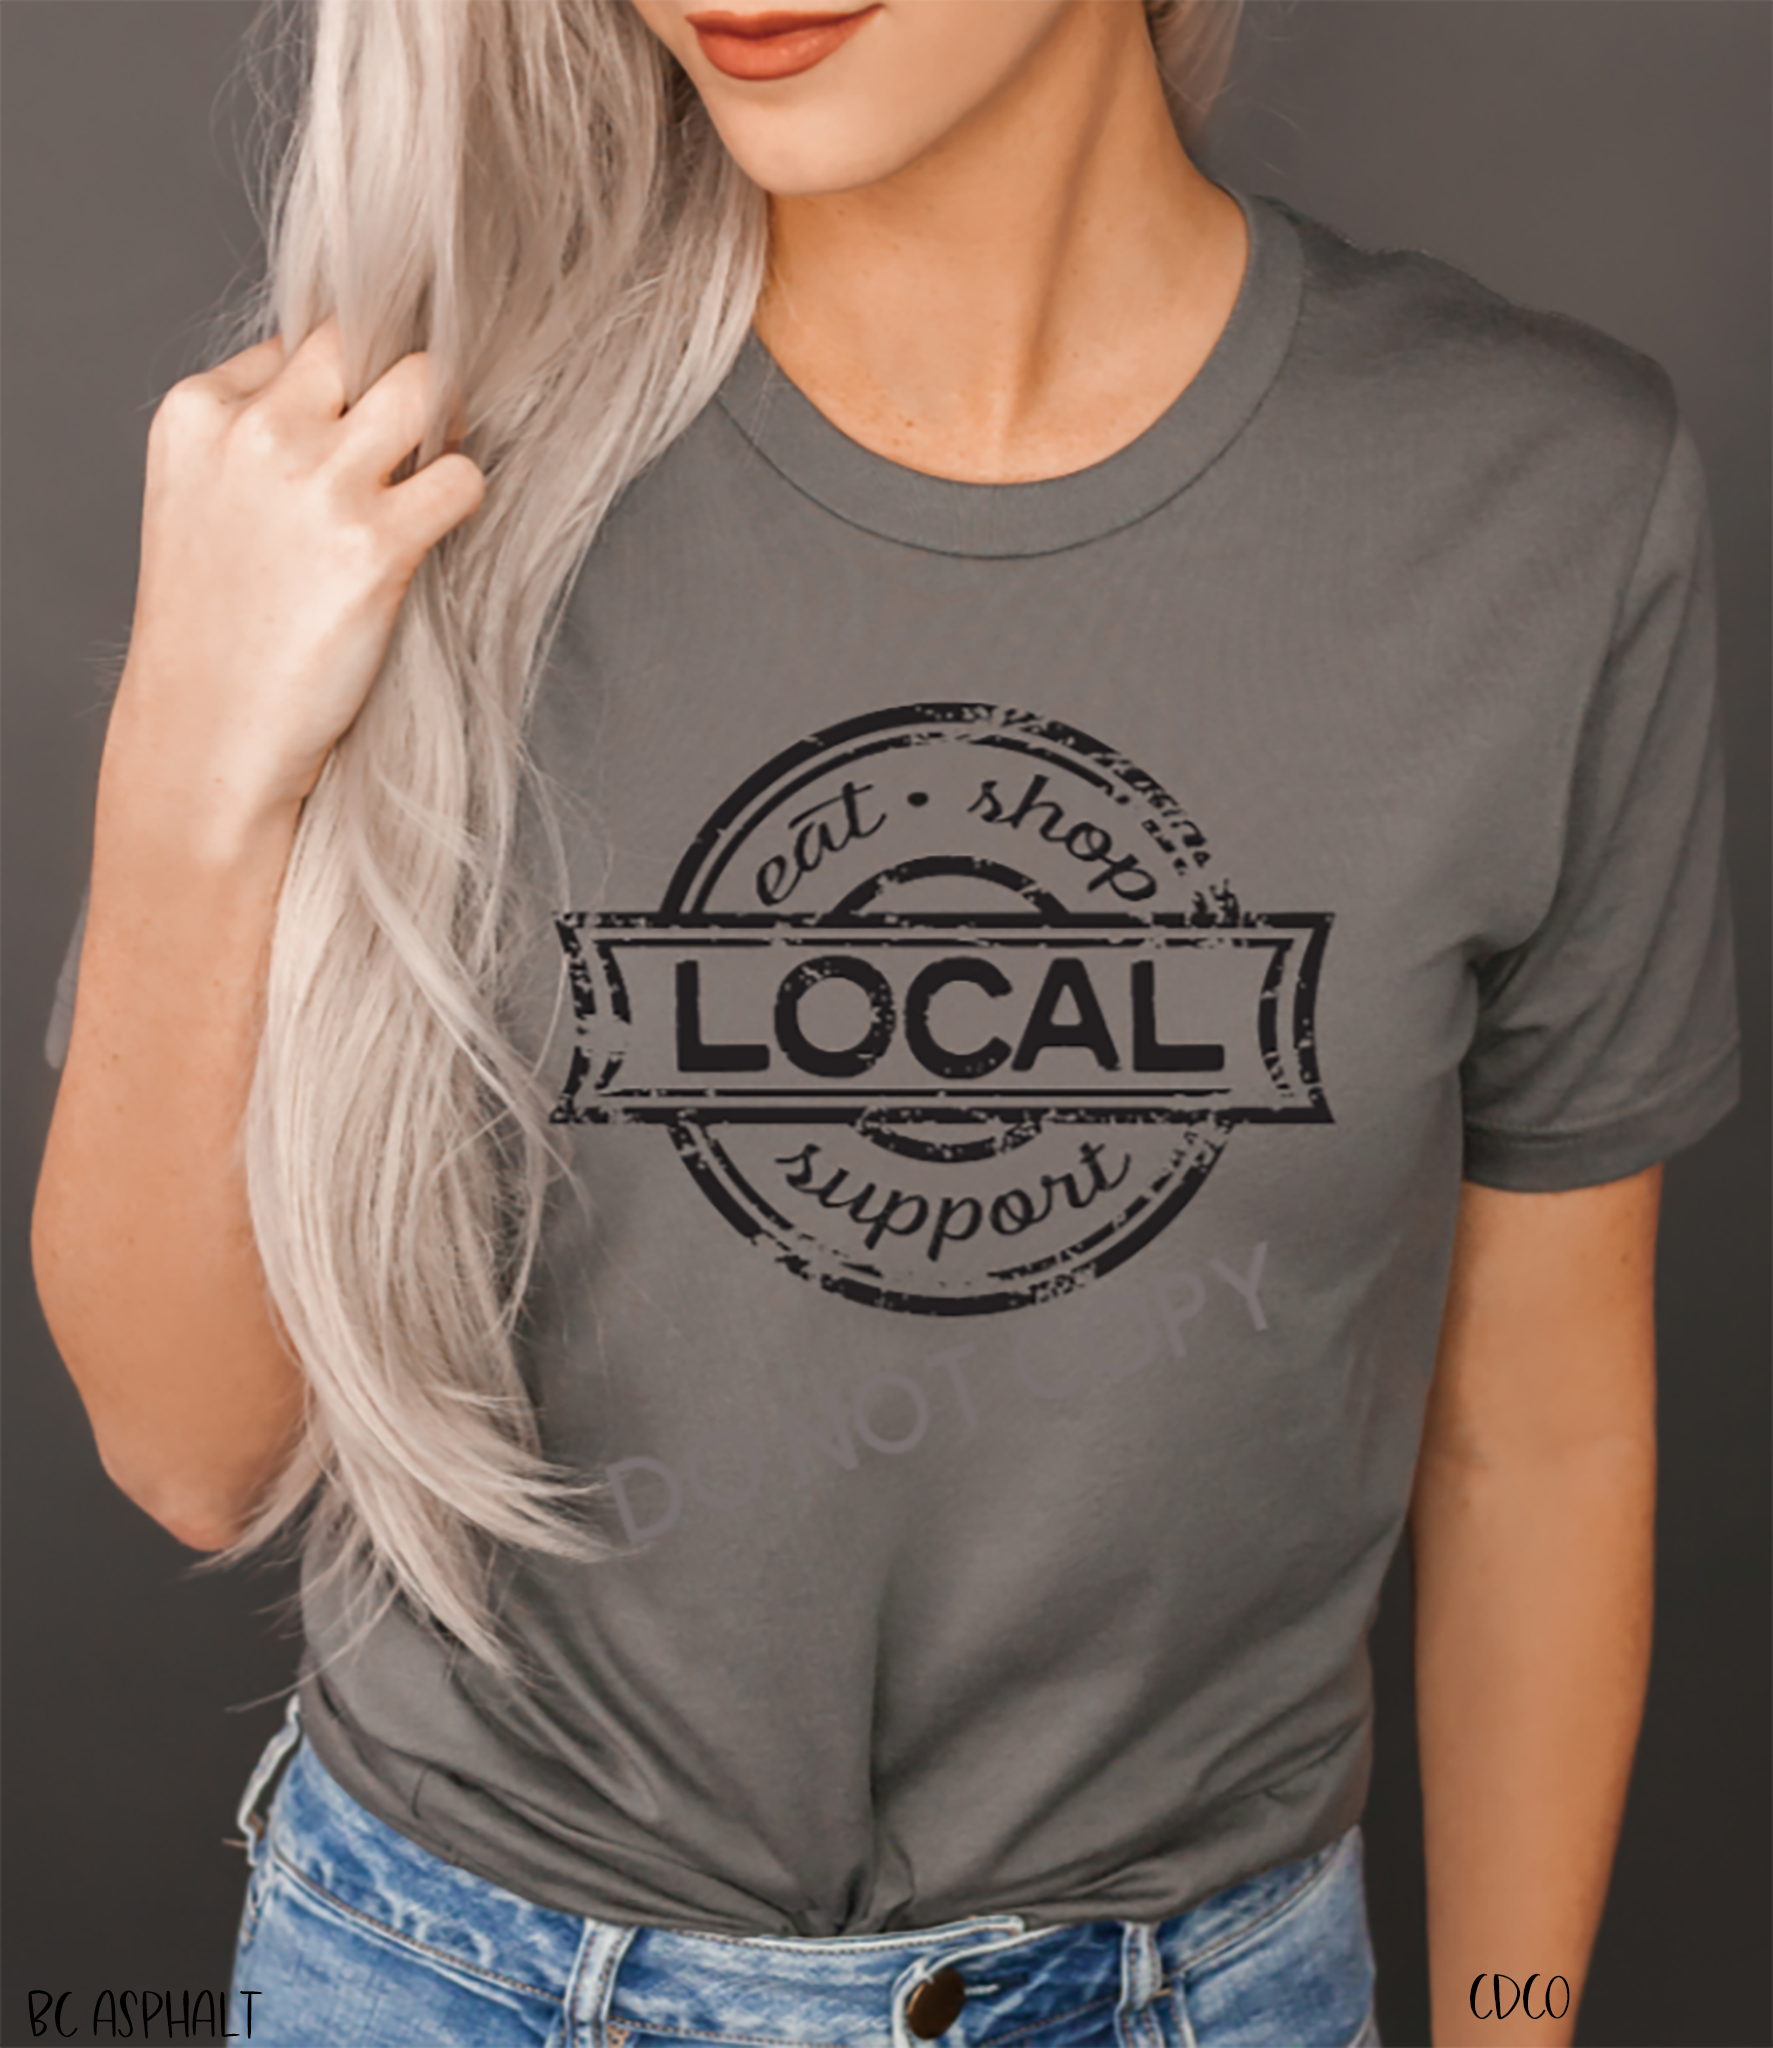 Eat Shop Support Local (325°) - Chase Design Co.